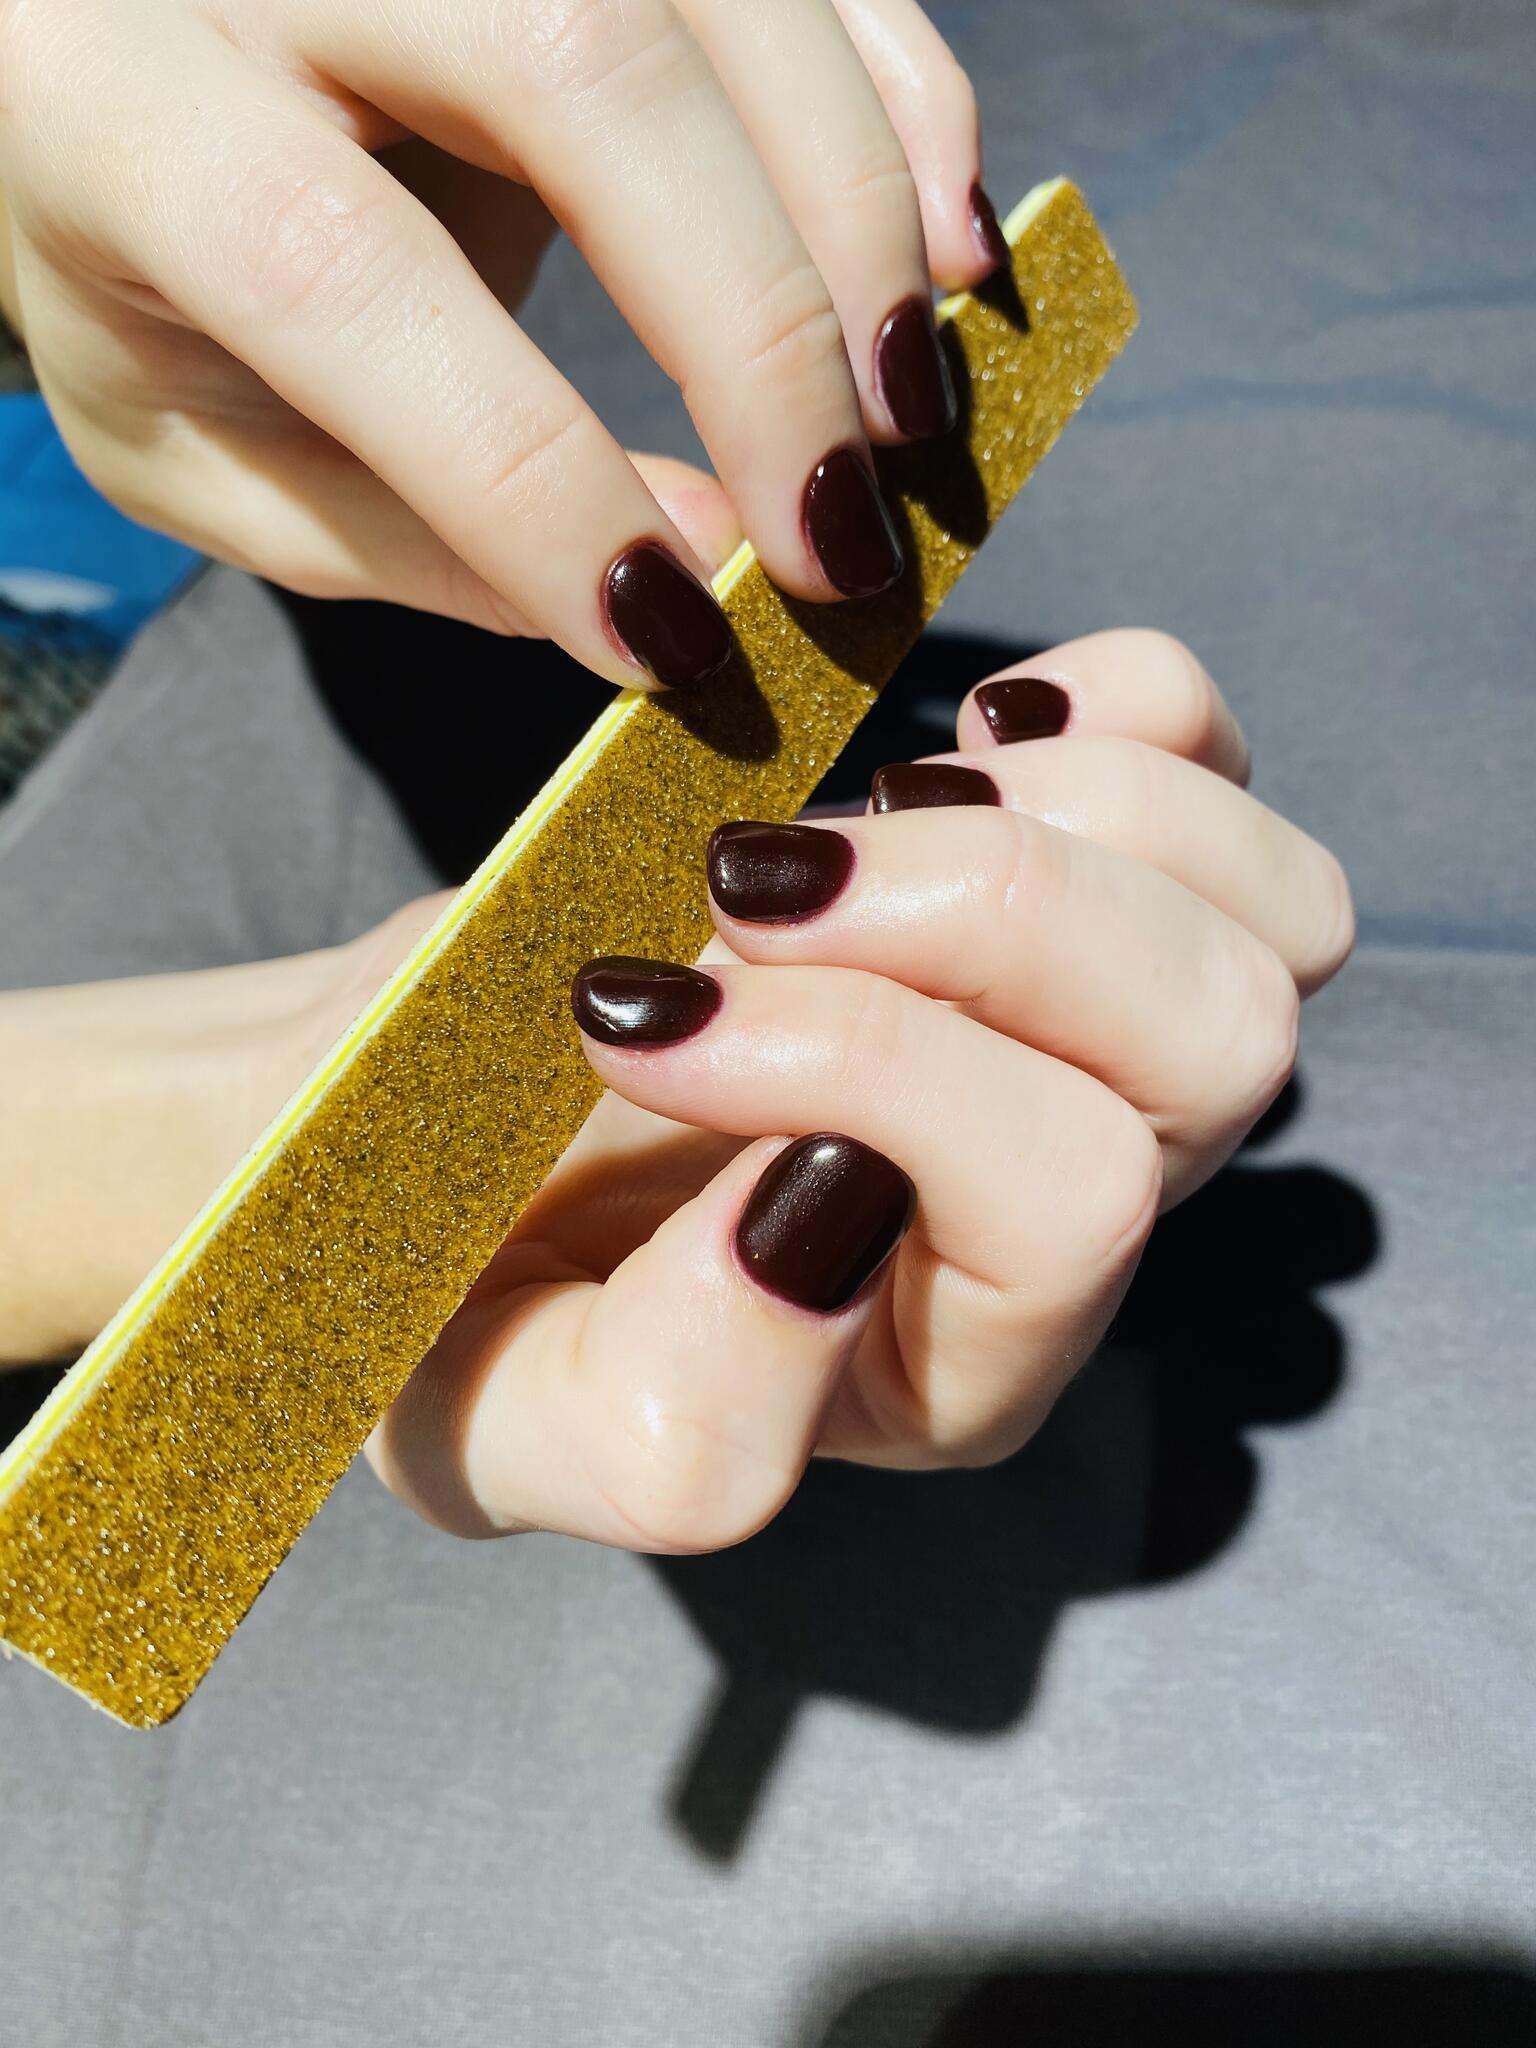 Manicure with Nail Design - Naturally Lovely Nails By Linzie | Groupon